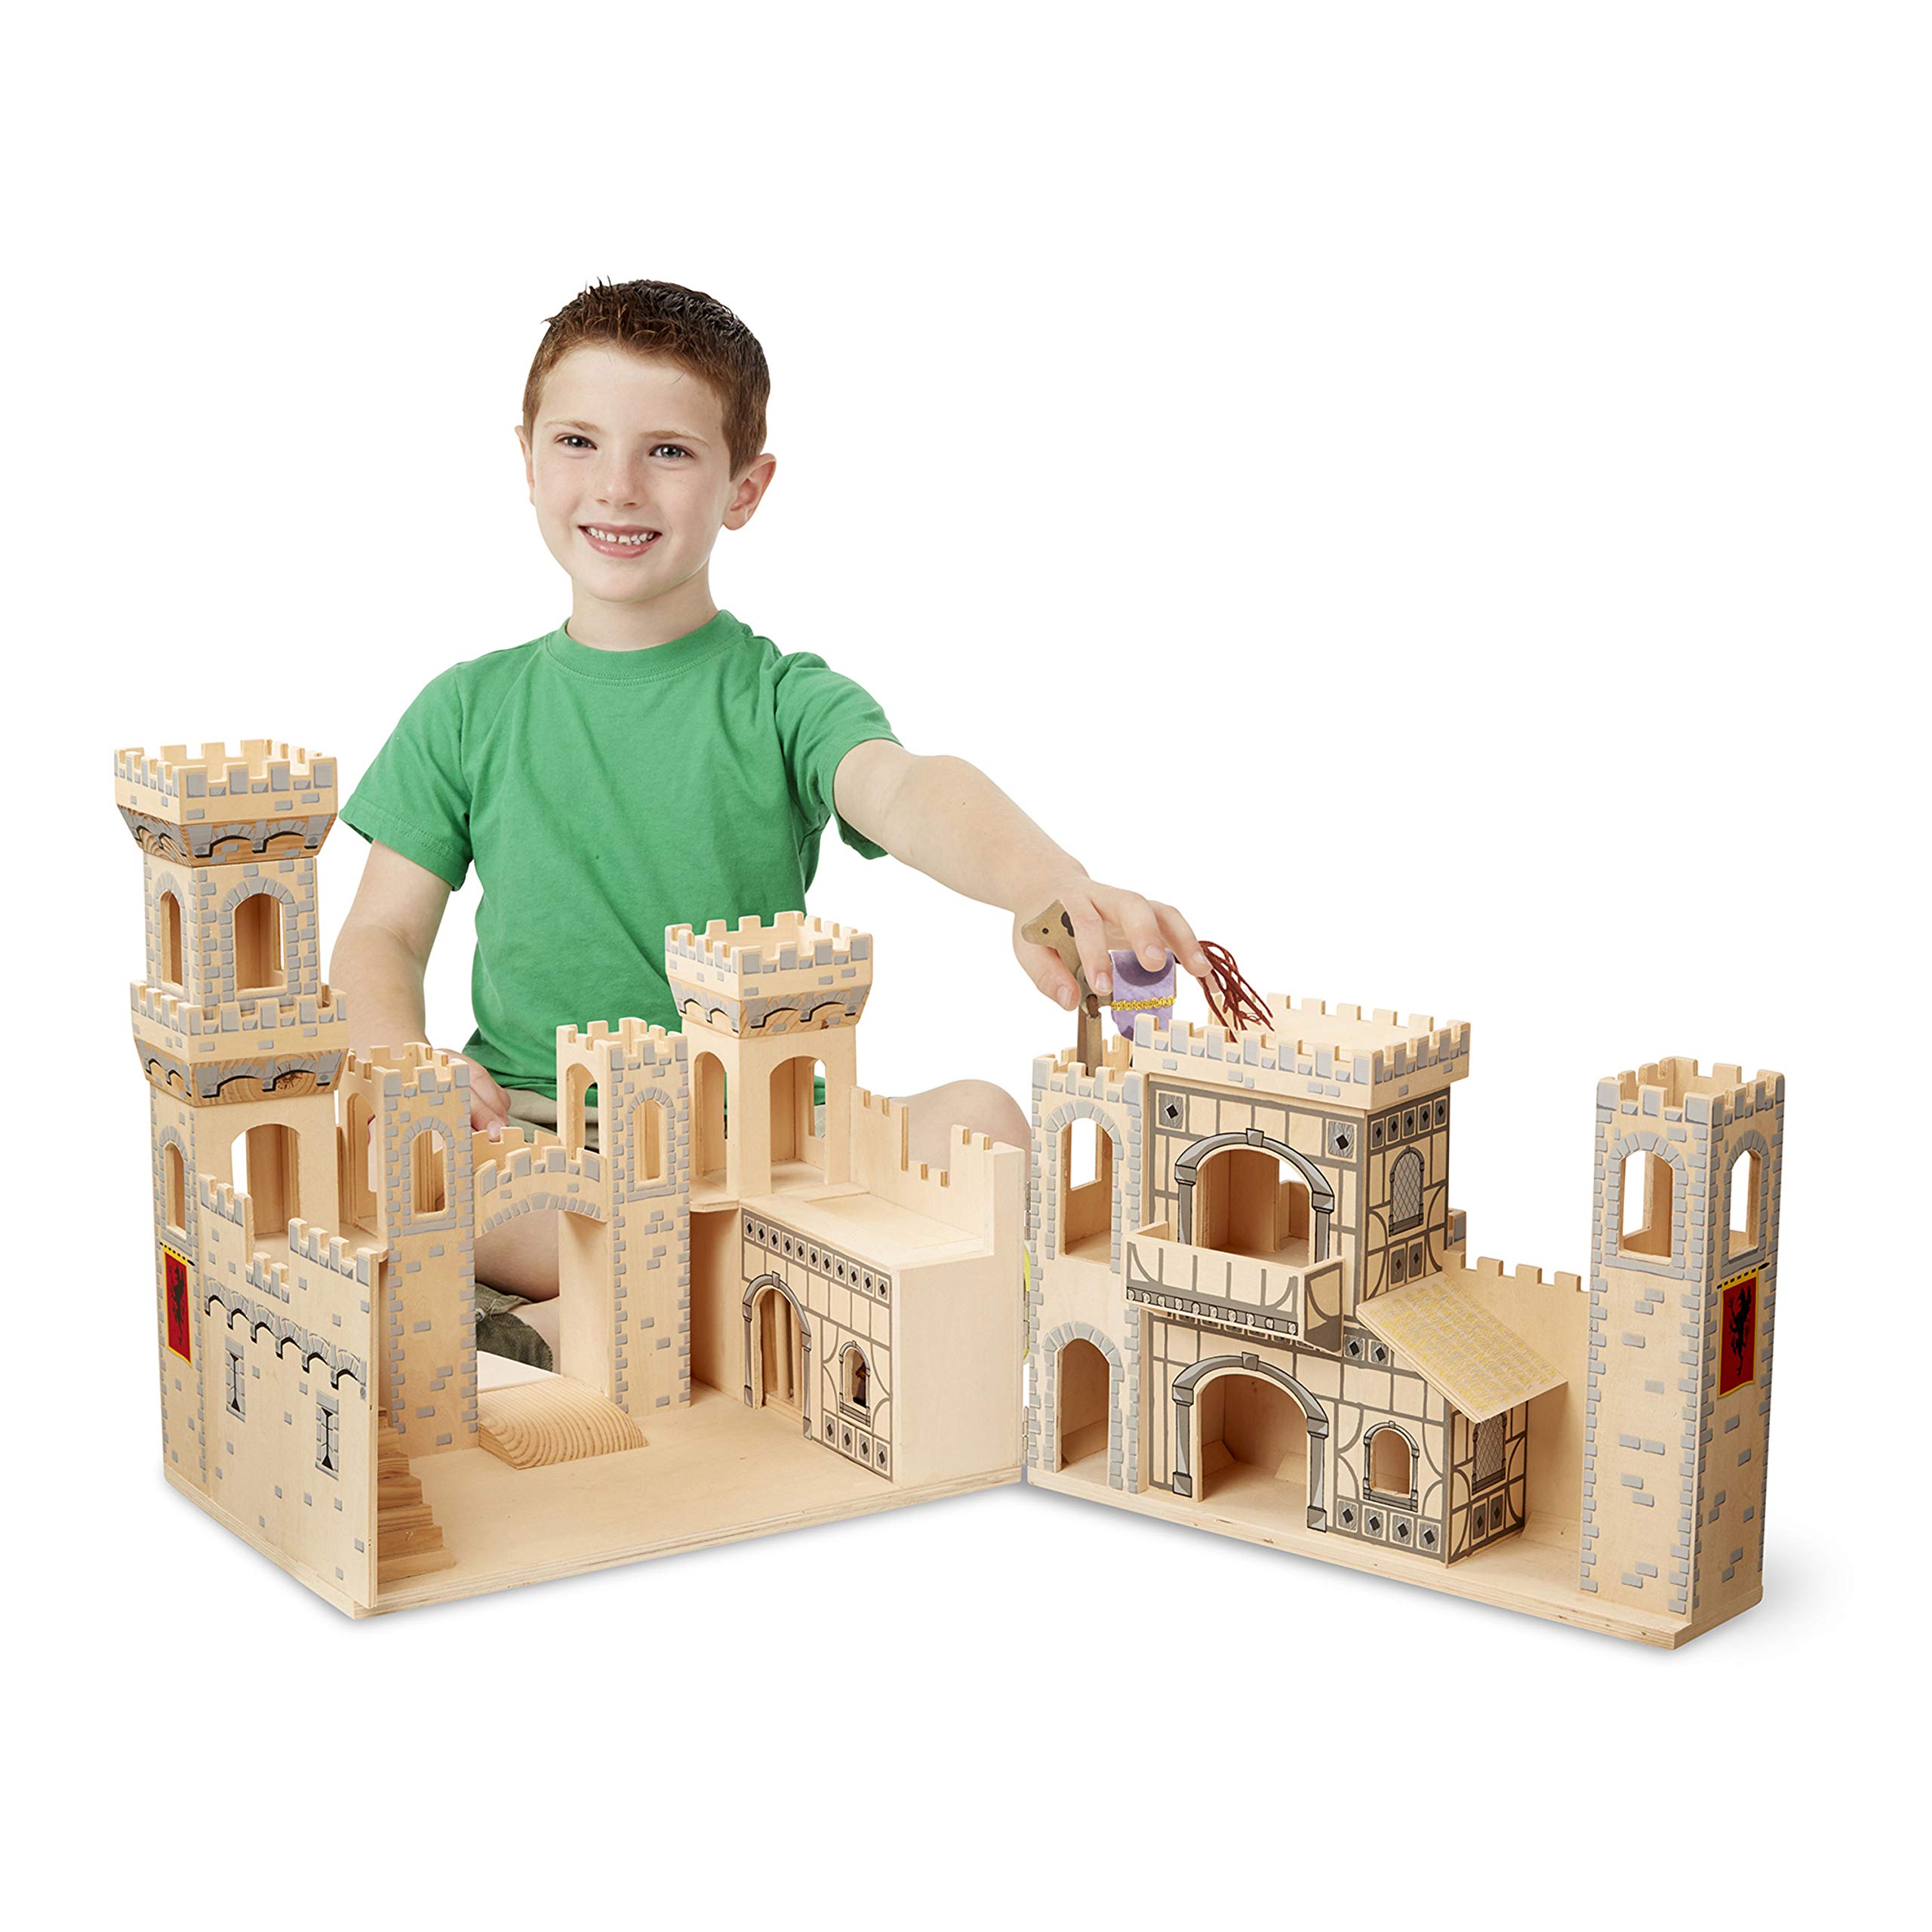 Melissa & Doug Deluxe Folding Medieval Wooden Castle - Hinged for Compact Storage H: 19.7 x W: 18.5 x D: 14.2